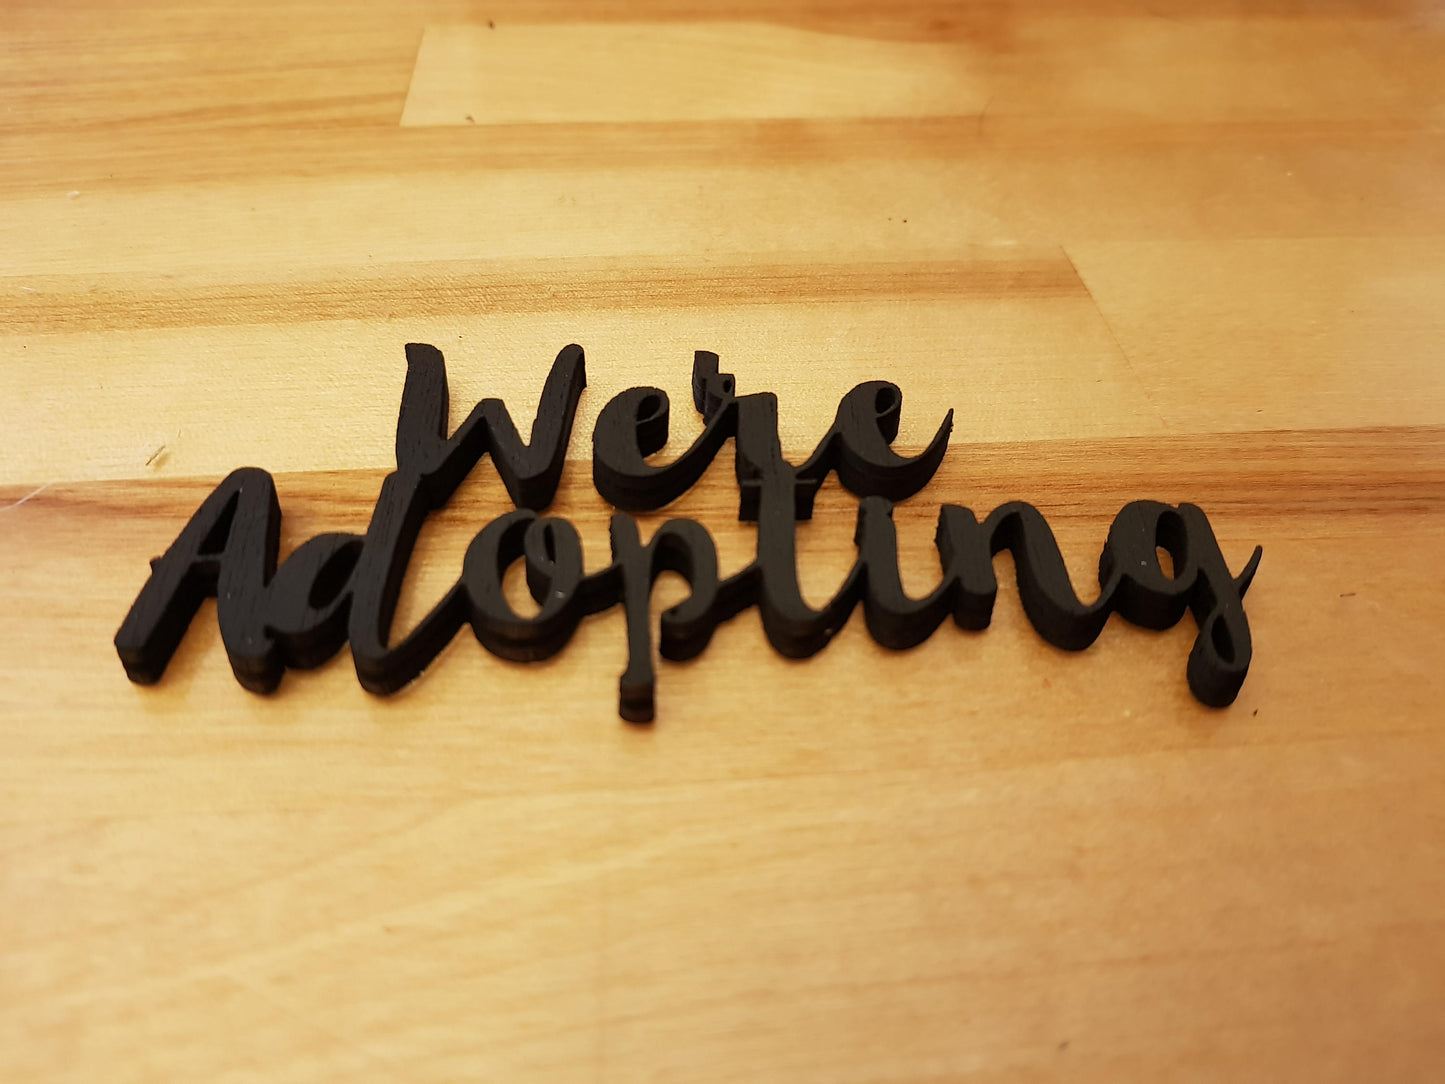 We're Adopting, Adopting Sign, Adoption, Picture Prop, Wooden Words, Laser Cut Out, Wood Cut Out, Custom Word Art, , Footstepsinthepast